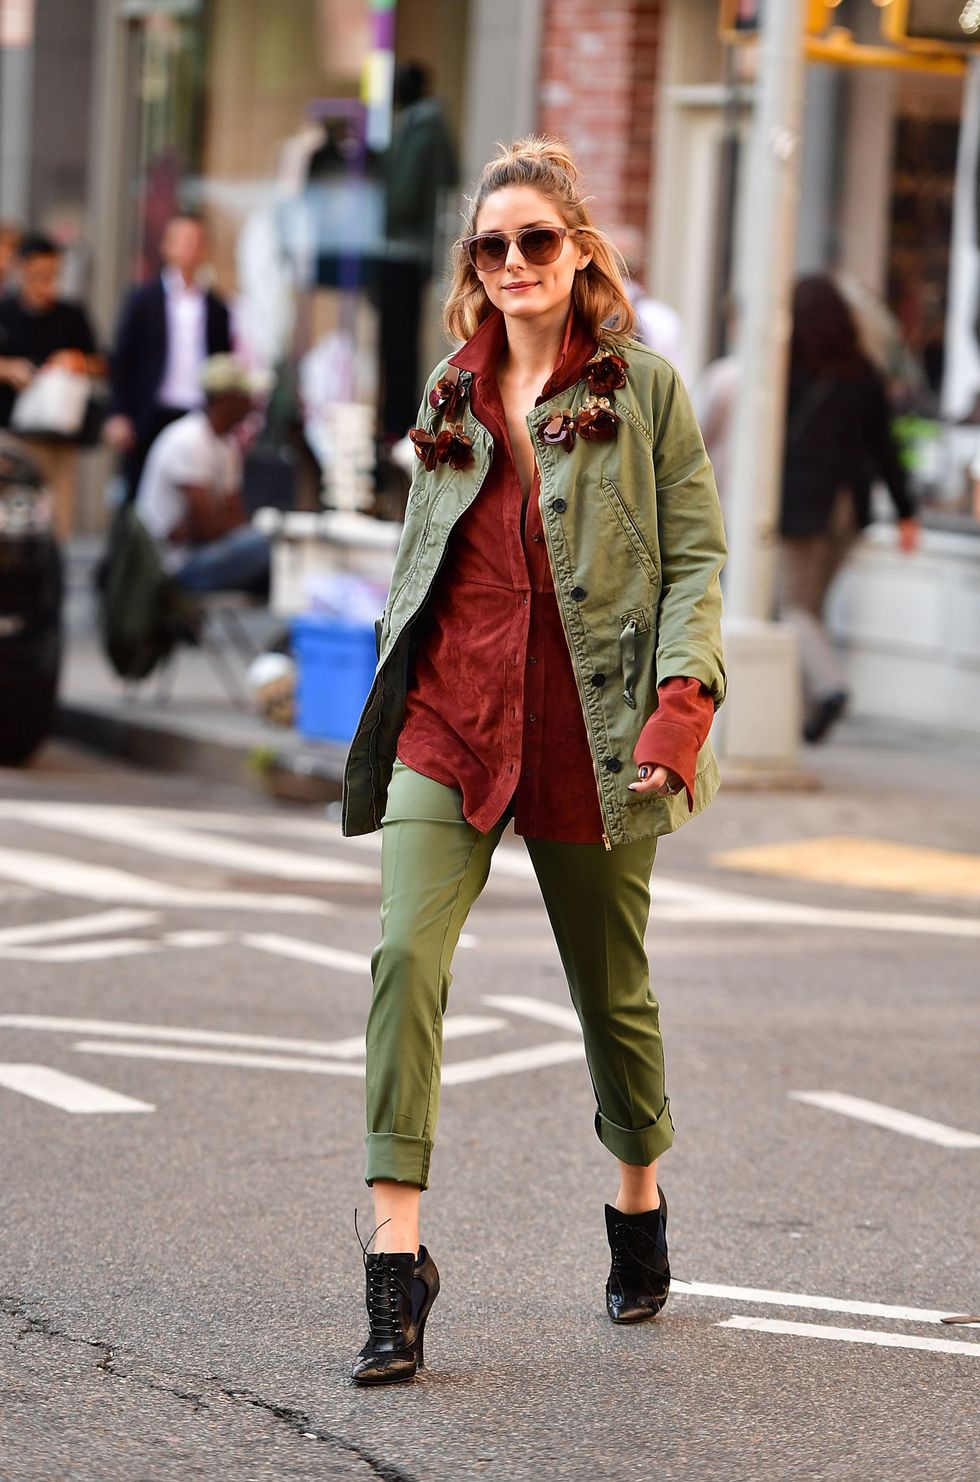 NEW YORK, NY - OCTOBER 18:  Olivia Palermo seen in SoHo during a photoshoot on October 18, 2016 in New York City.  (Photo by James Devaney/GC Images)